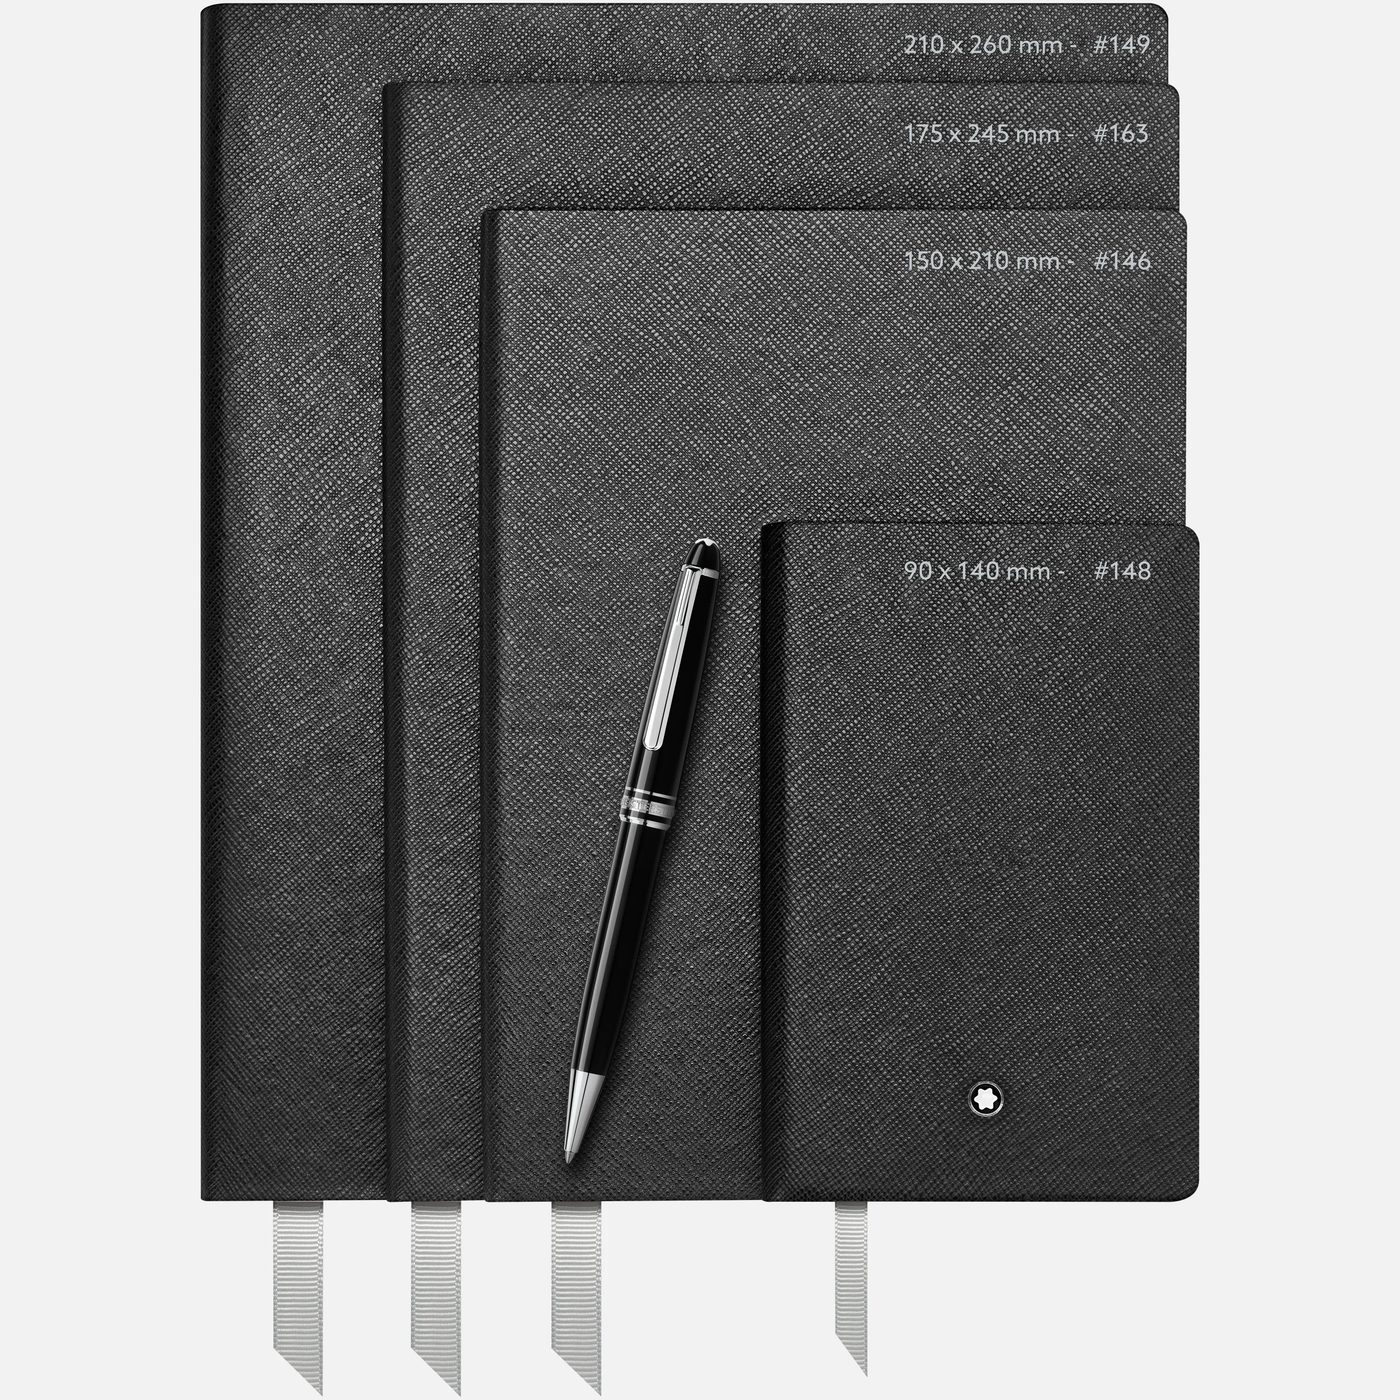 Montblanc 163 Notebook Dimensions